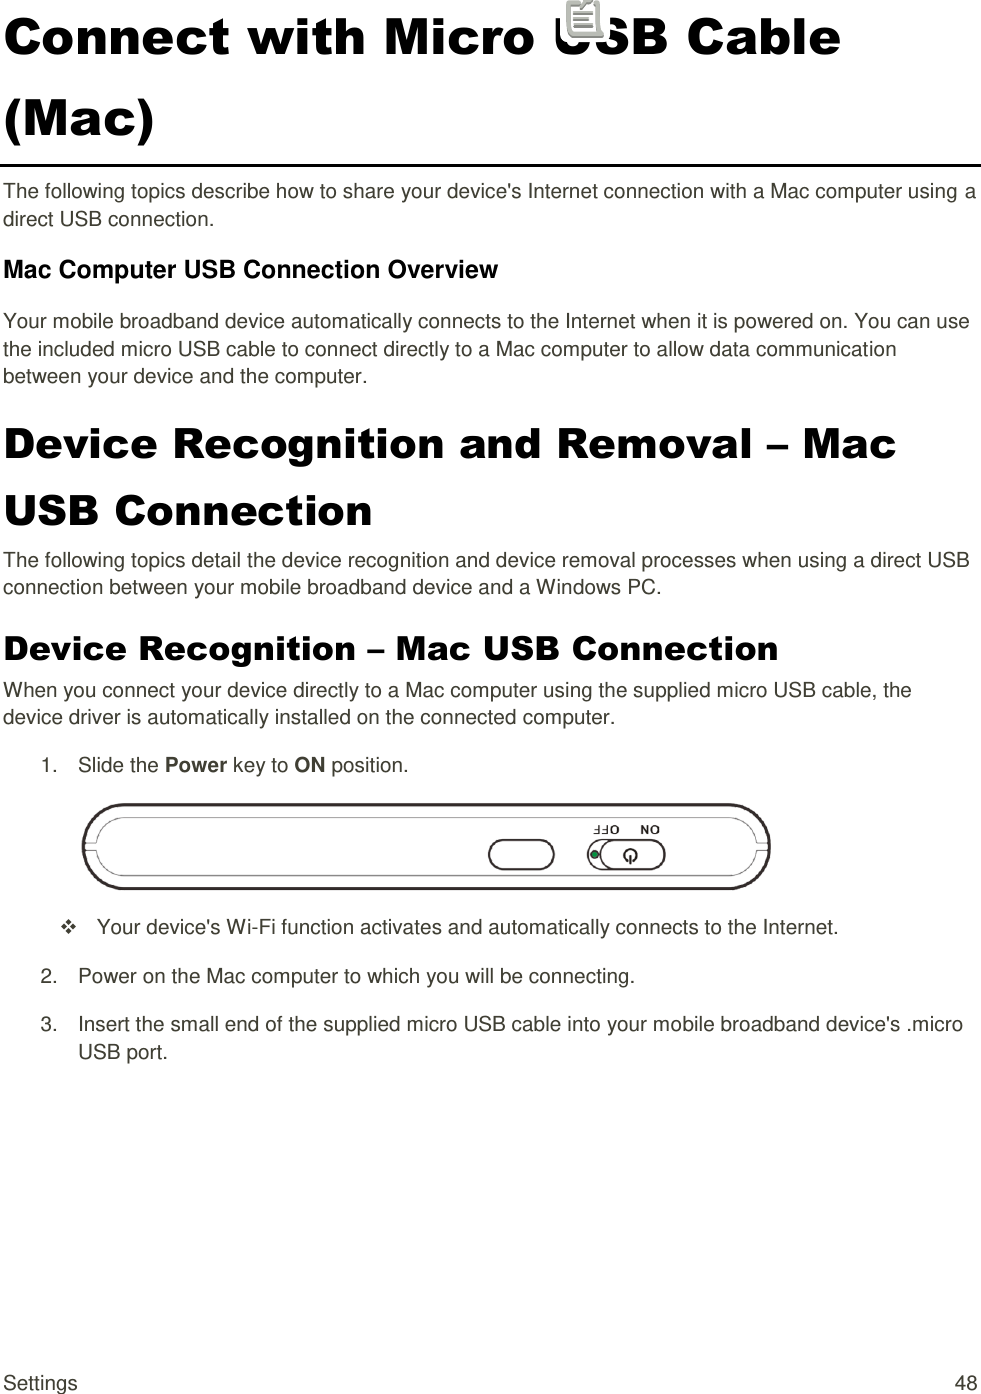 Settings  48 Connect with Micro USB Cable (Mac) The following topics describe how to share your device&apos;s Internet connection with a Mac computer using a direct USB connection. Mac Computer USB Connection Overview Your mobile broadband device automatically connects to the Internet when it is powered on. You can use the included micro USB cable to connect directly to a Mac computer to allow data communication between your device and the computer.  Device Recognition and Removal – Mac USB Connection The following topics detail the device recognition and device removal processes when using a direct USB connection between your mobile broadband device and a Windows PC. Device Recognition – Mac USB Connection When you connect your device directly to a Mac computer using the supplied micro USB cable, the device driver is automatically installed on the connected computer. 1.  Slide the Power key to ON position.    Your device&apos;s Wi-Fi function activates and automatically connects to the Internet. 2.  Power on the Mac computer to which you will be connecting. 3.  Insert the small end of the supplied micro USB cable into your mobile broadband device&apos;s .micro USB port. 